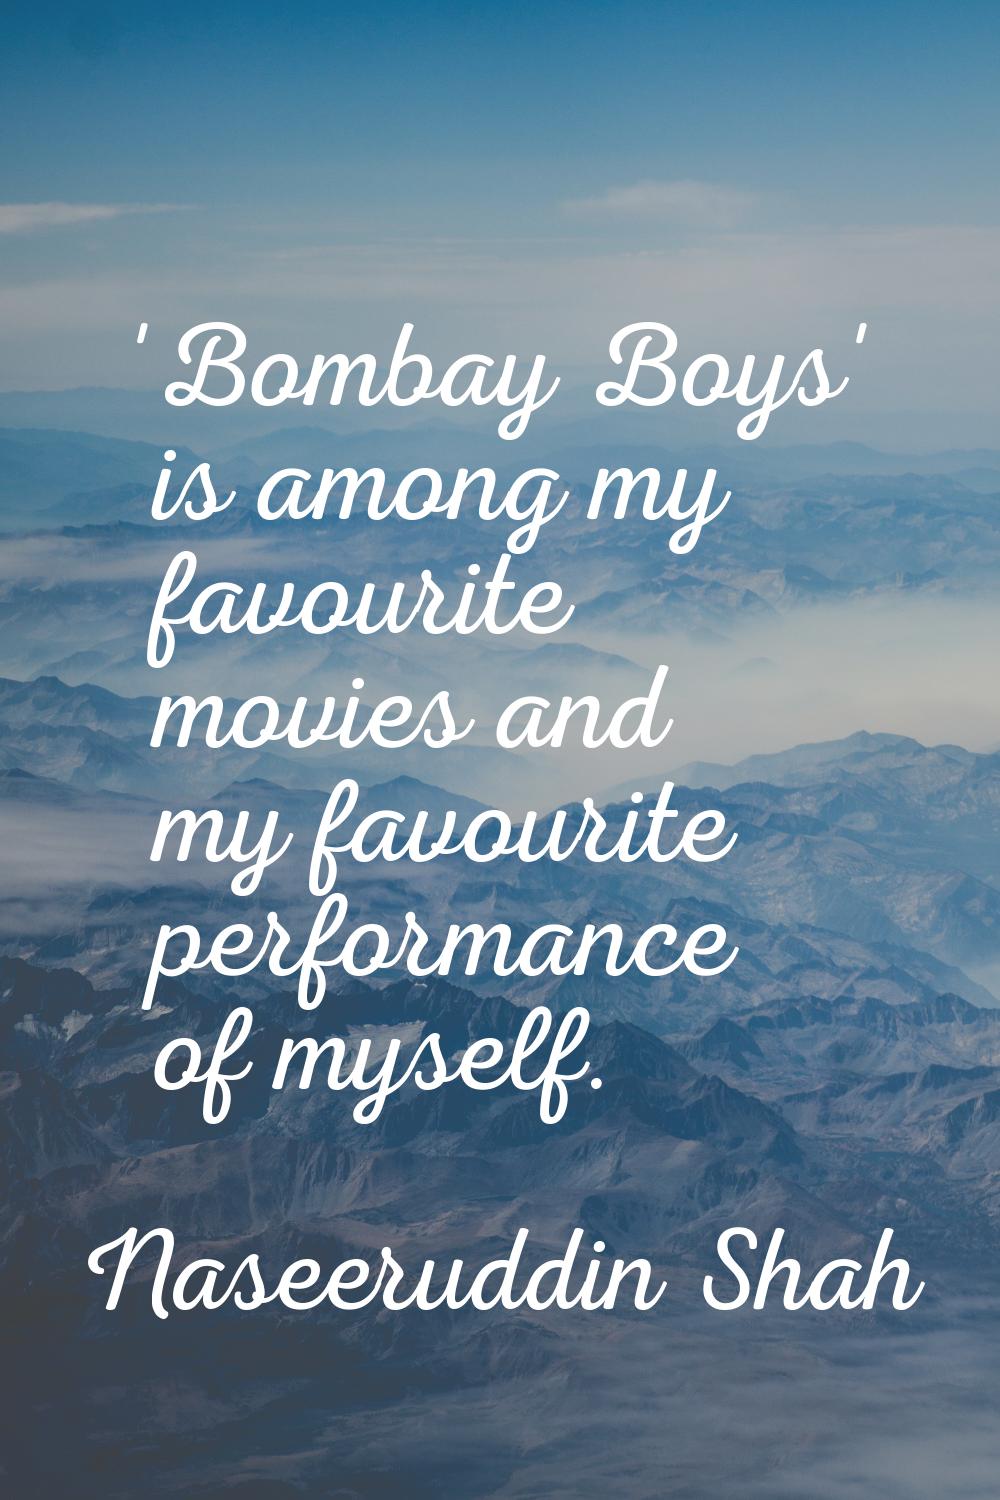 'Bombay Boys' is among my favourite movies and my favourite performance of myself.